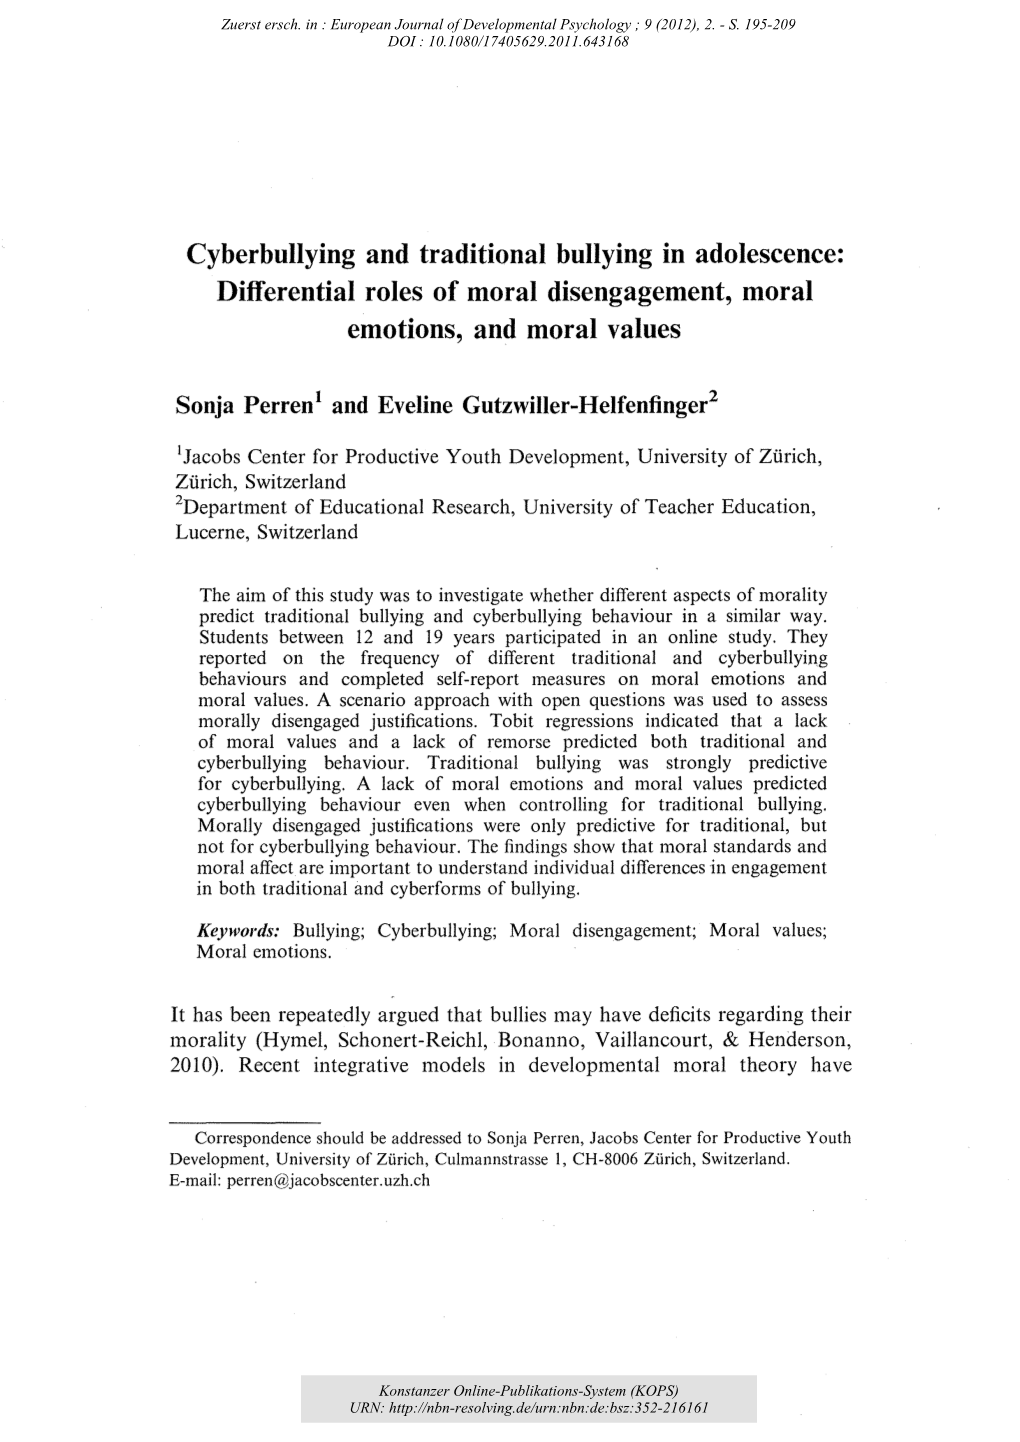 Cyberbullying and Traditional Bullying in Adolescence : Differential Roles Of